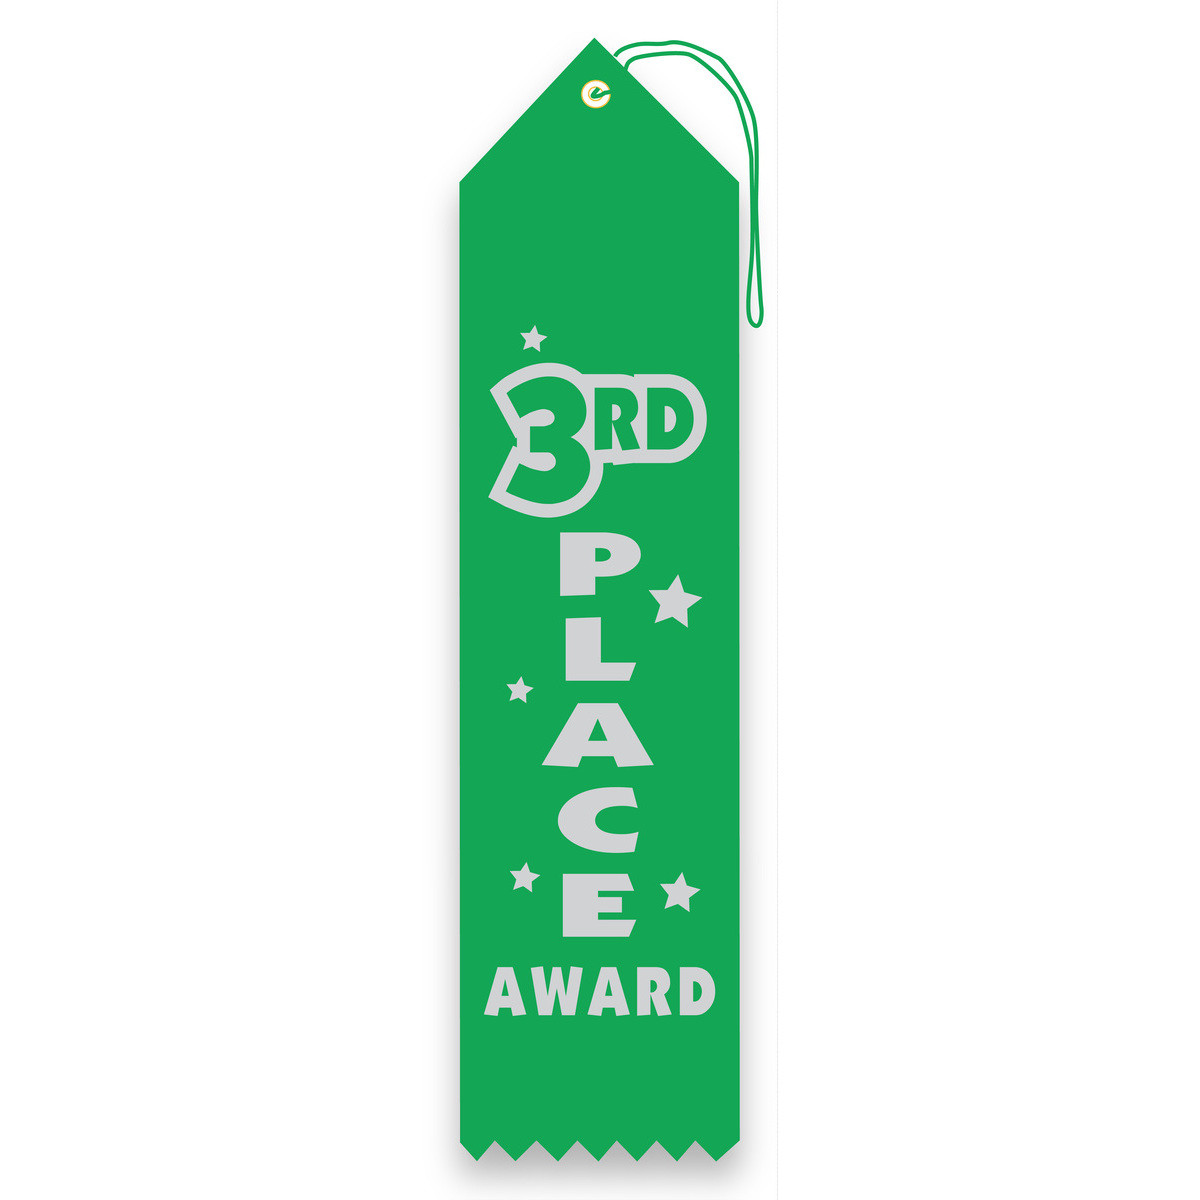 Carded Ribbon - 3rd Place Award